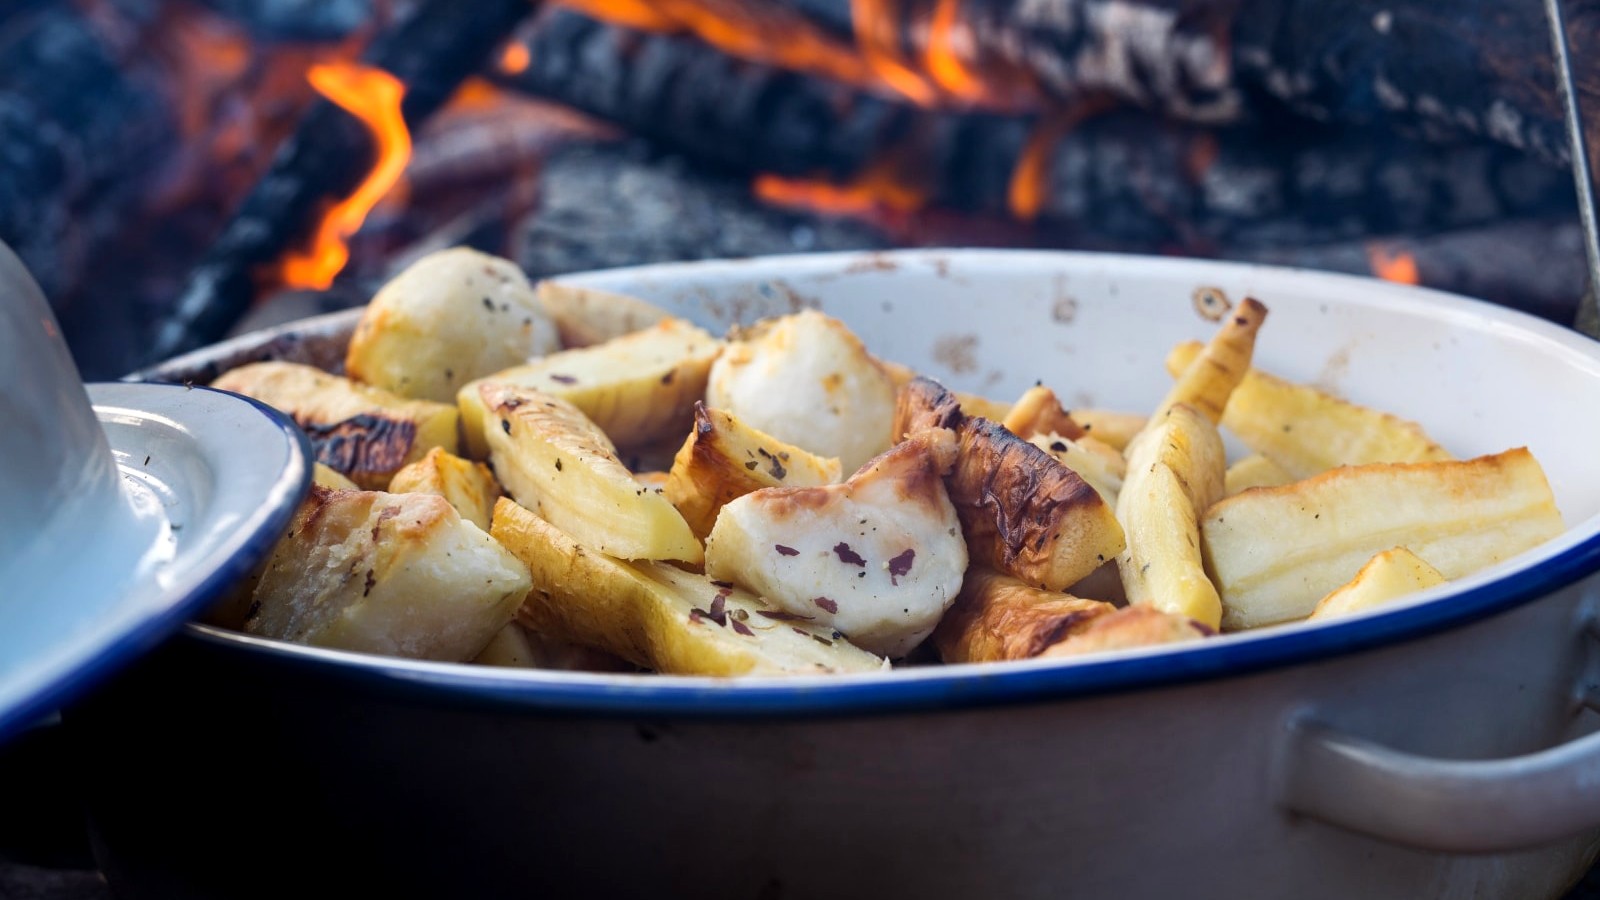 Image of Roasted Parsnips with Laver and Dulse Seaweed Seasoning